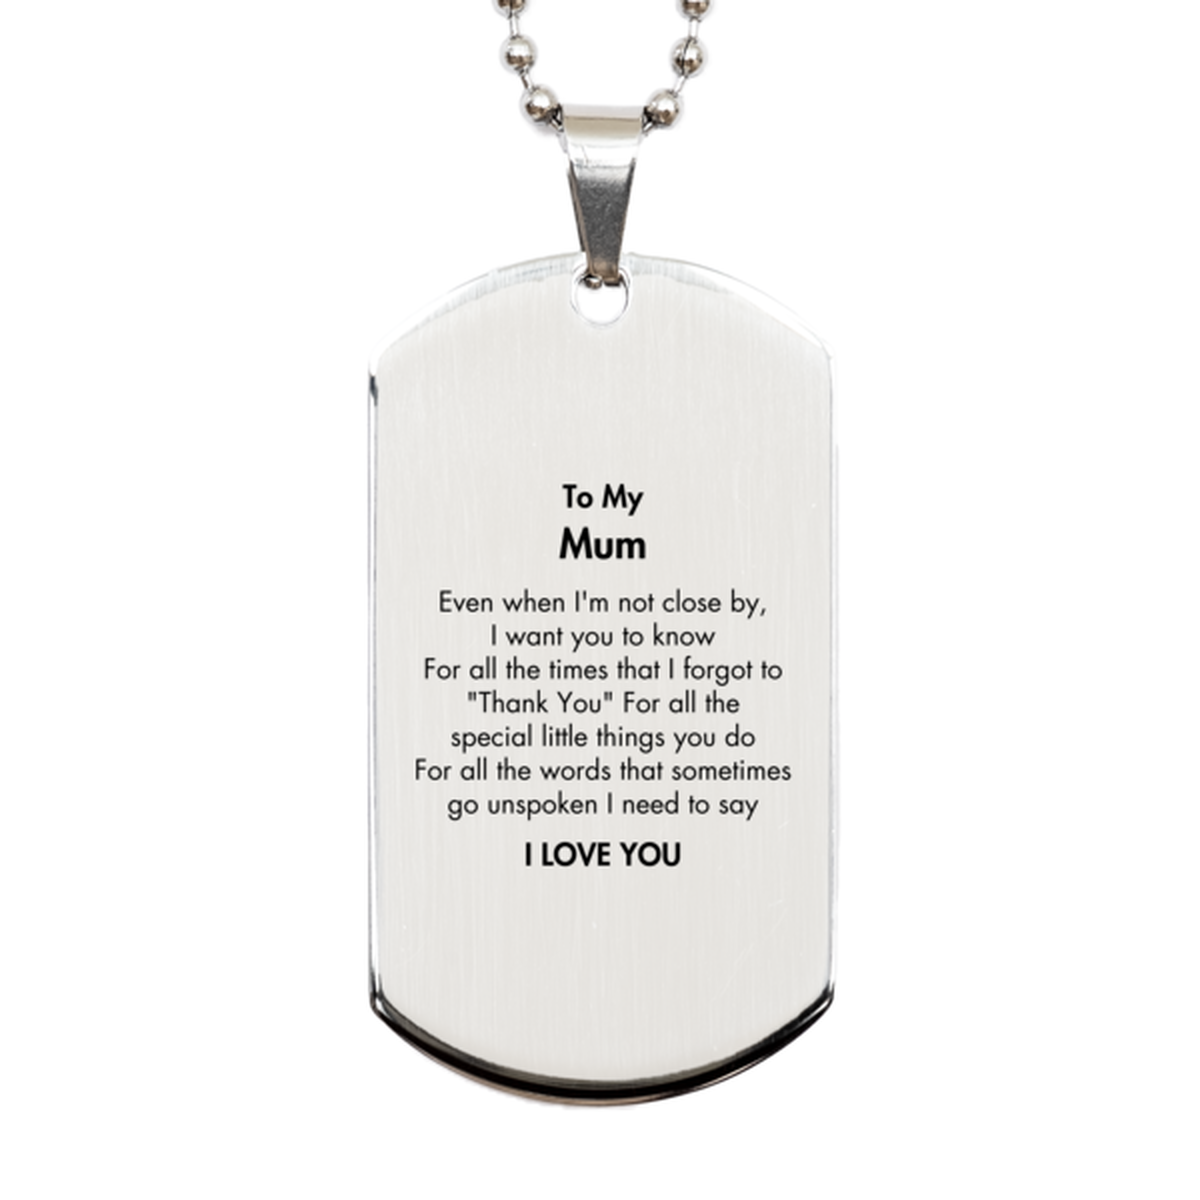 Thank You Gifts for Mum, Keepsake Silver Dog Tag Gifts for Mum Birthday Mother's day Father's Day Mum For all the words That sometimes go unspoken I need to say I LOVE YOU